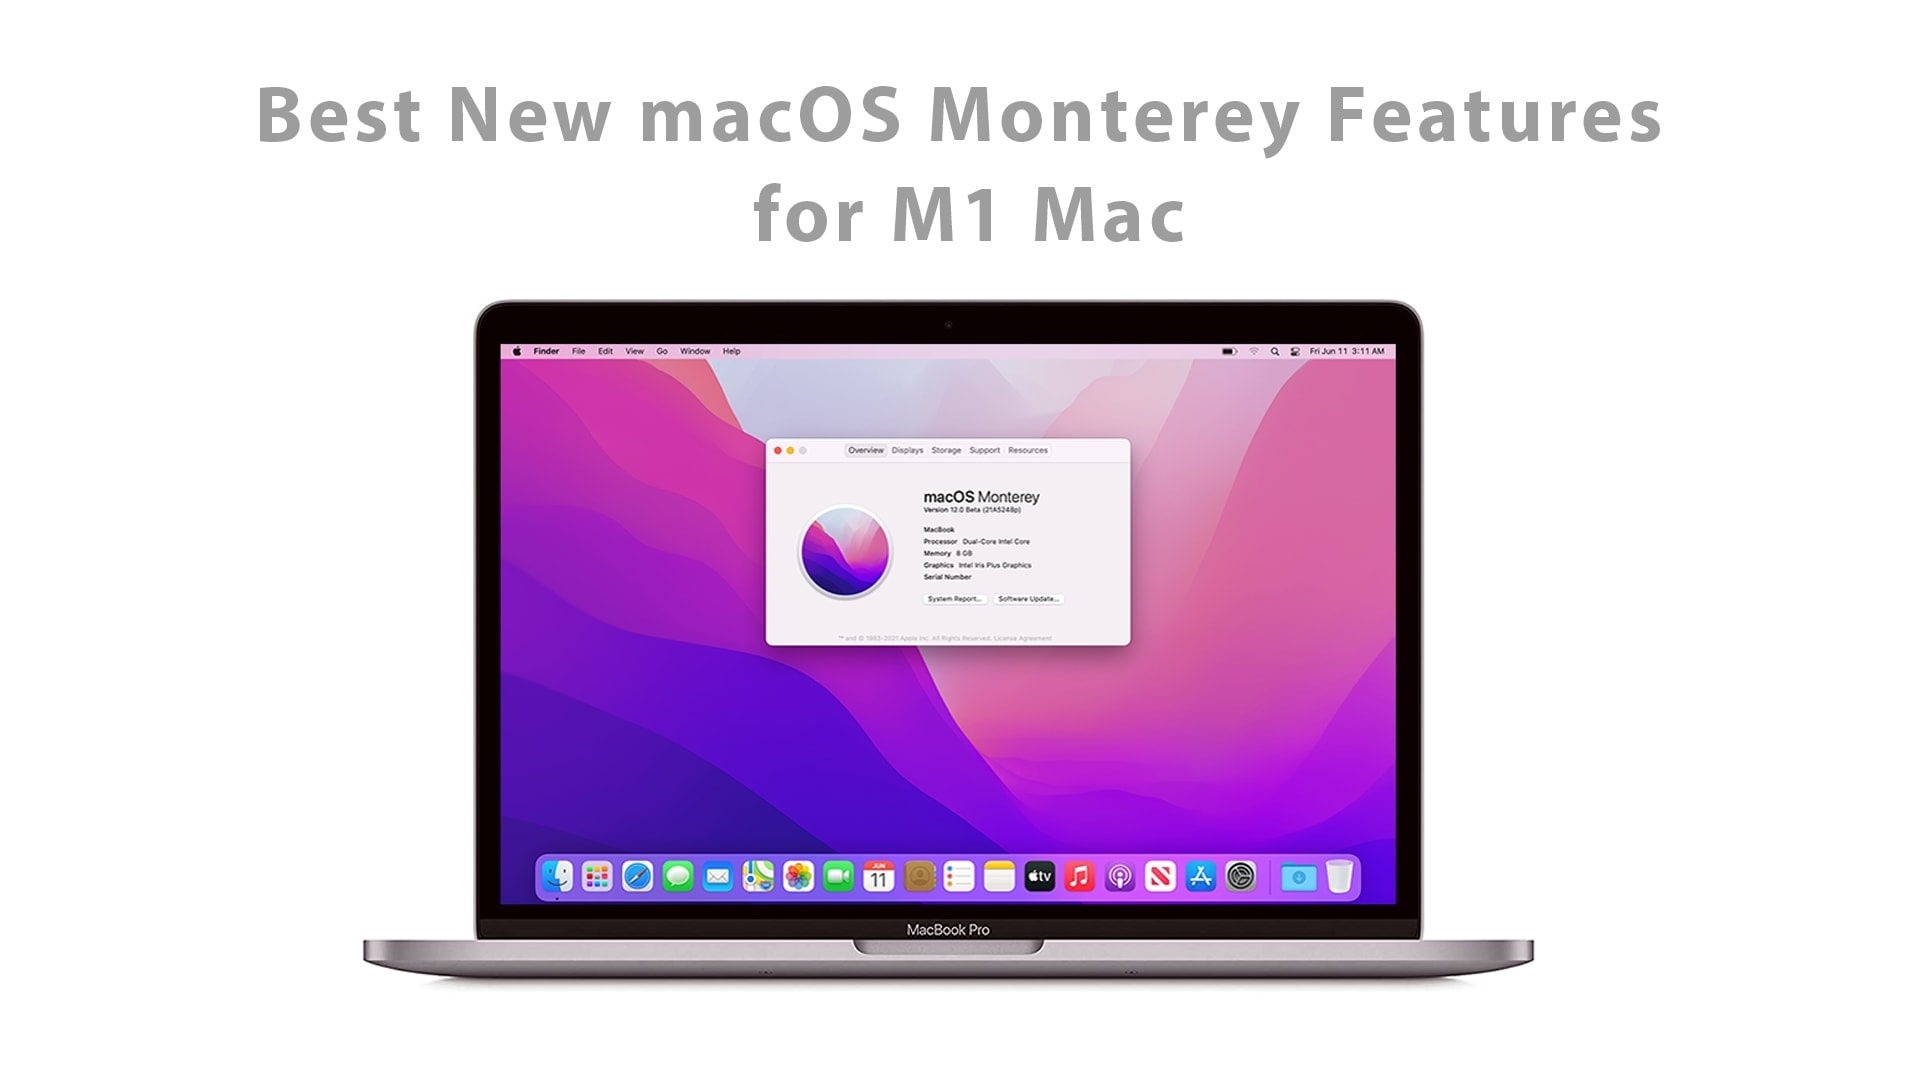 Best New macOS Monterey Features for M1 Mac